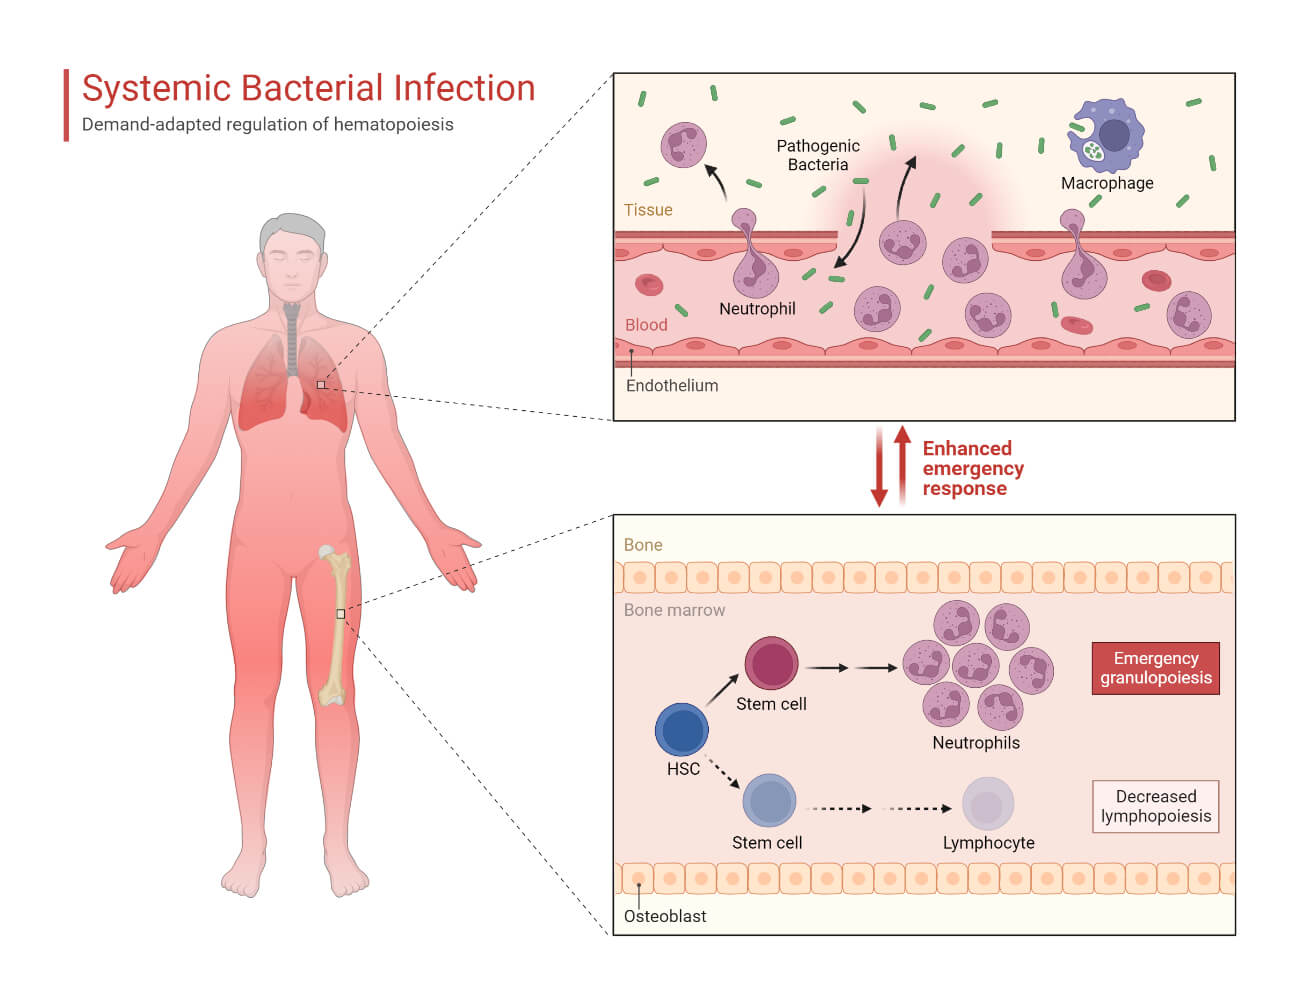 Systemic Bacterial Infection